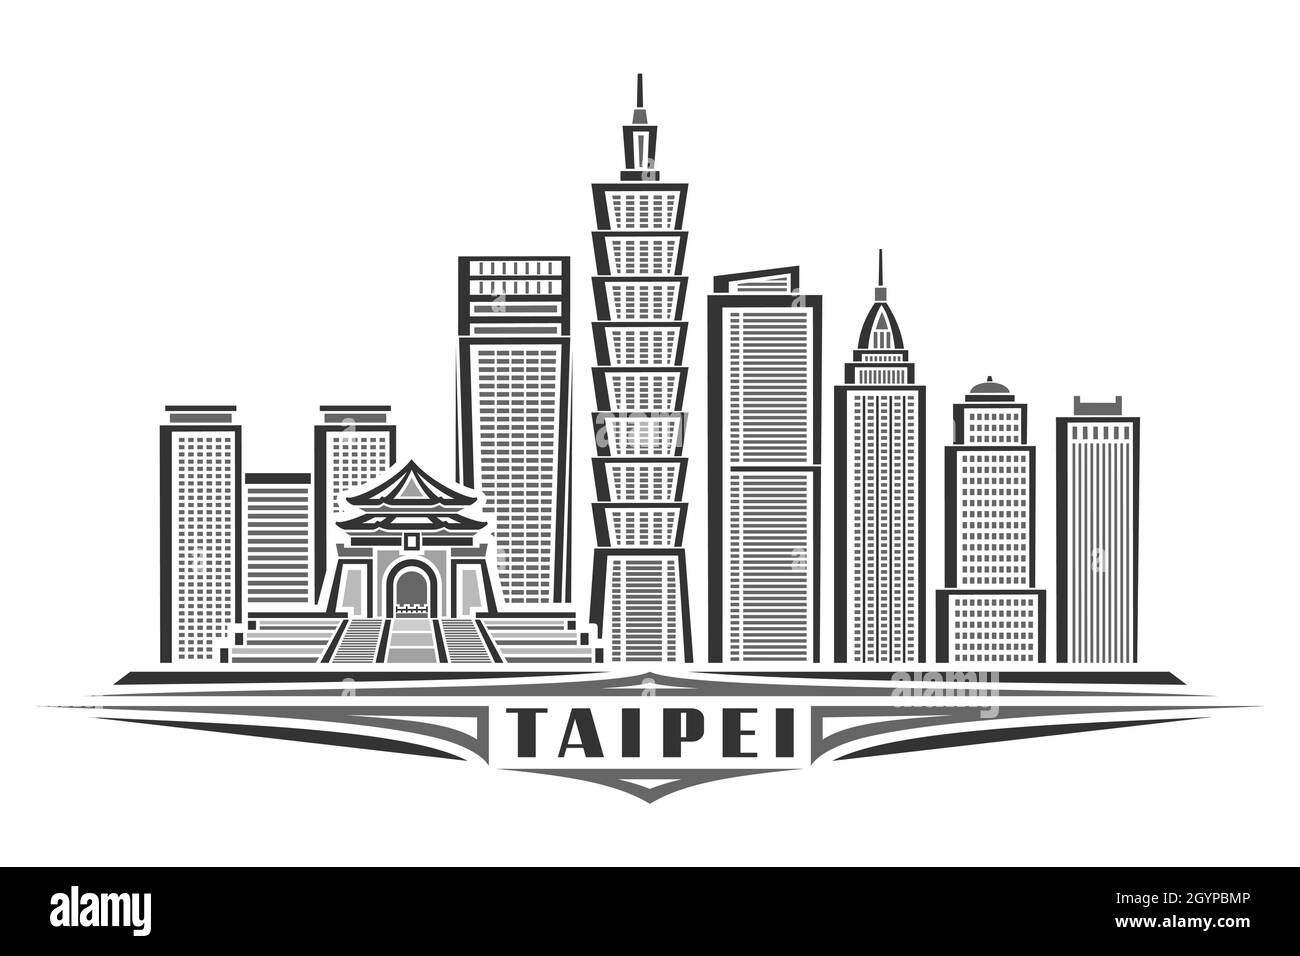 Vector illustration of Taipei, monochrome horizontal poster with linear design famous taipei city scape, urban line art concept with unique decorative Stock Vector